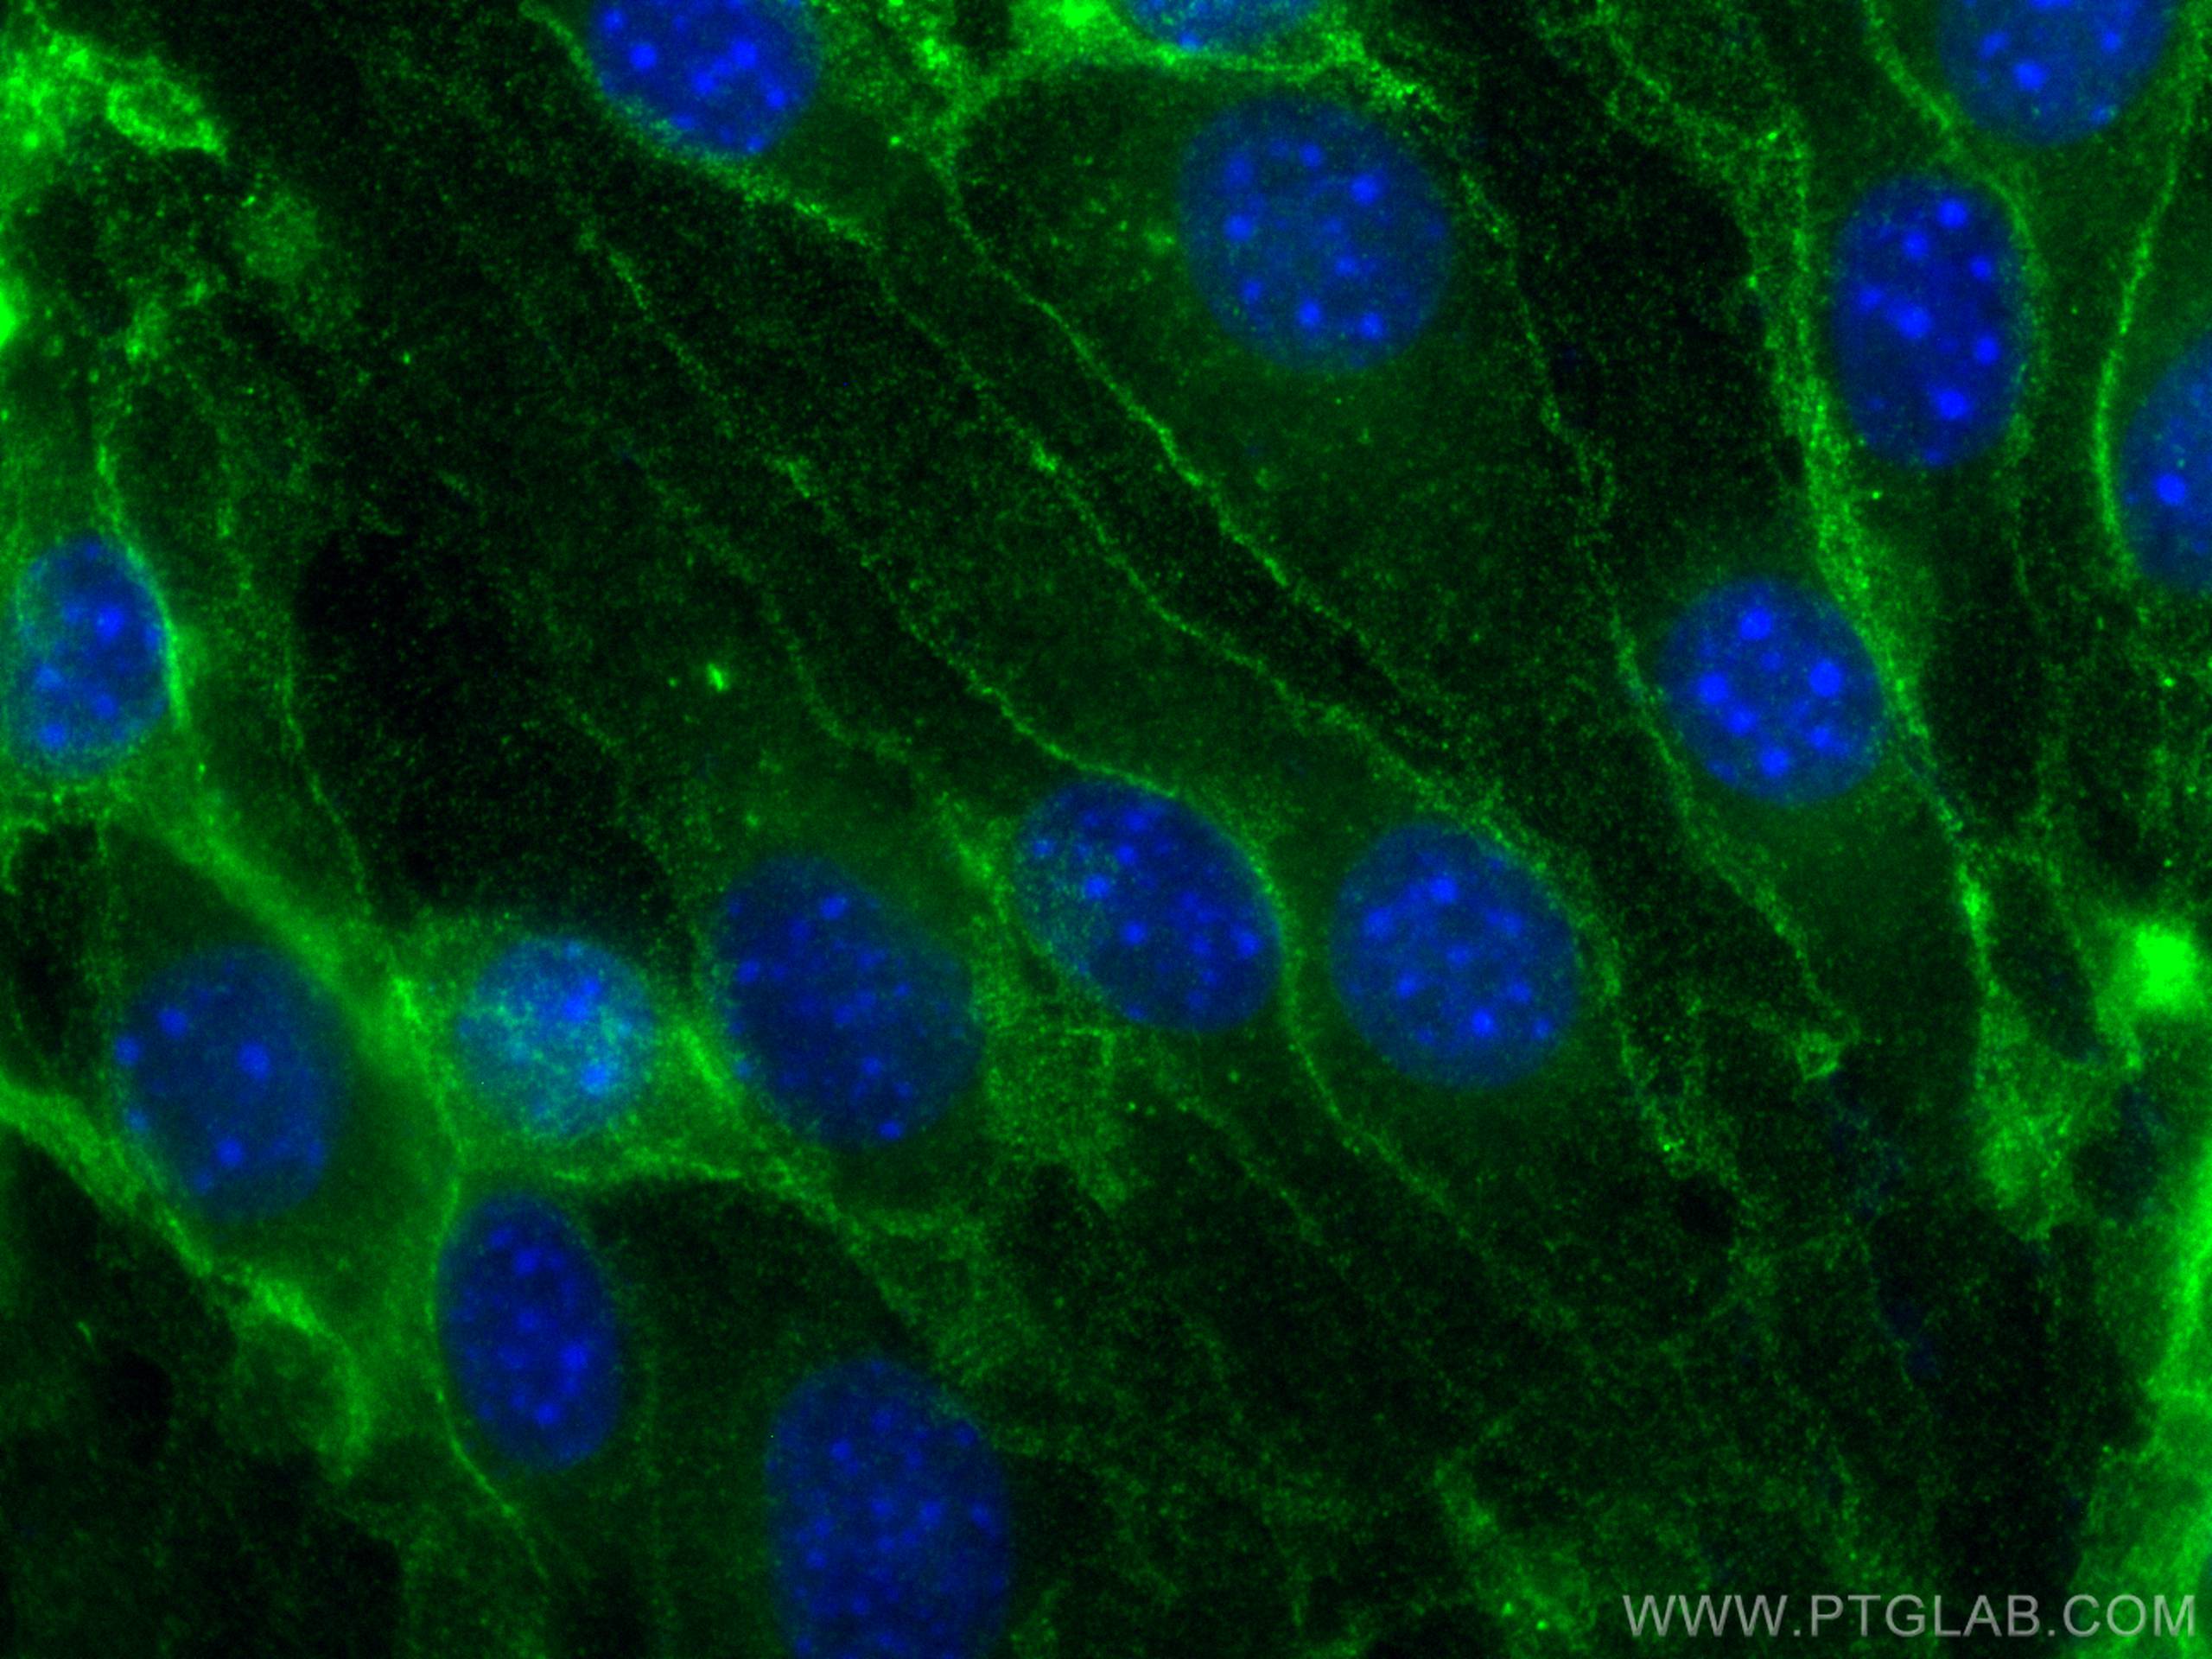 Immunofluorescence (IF) / fluorescent staining of bEnd.3 cells using Anti-Mouse CD31 (390) (65058-1-Ig)